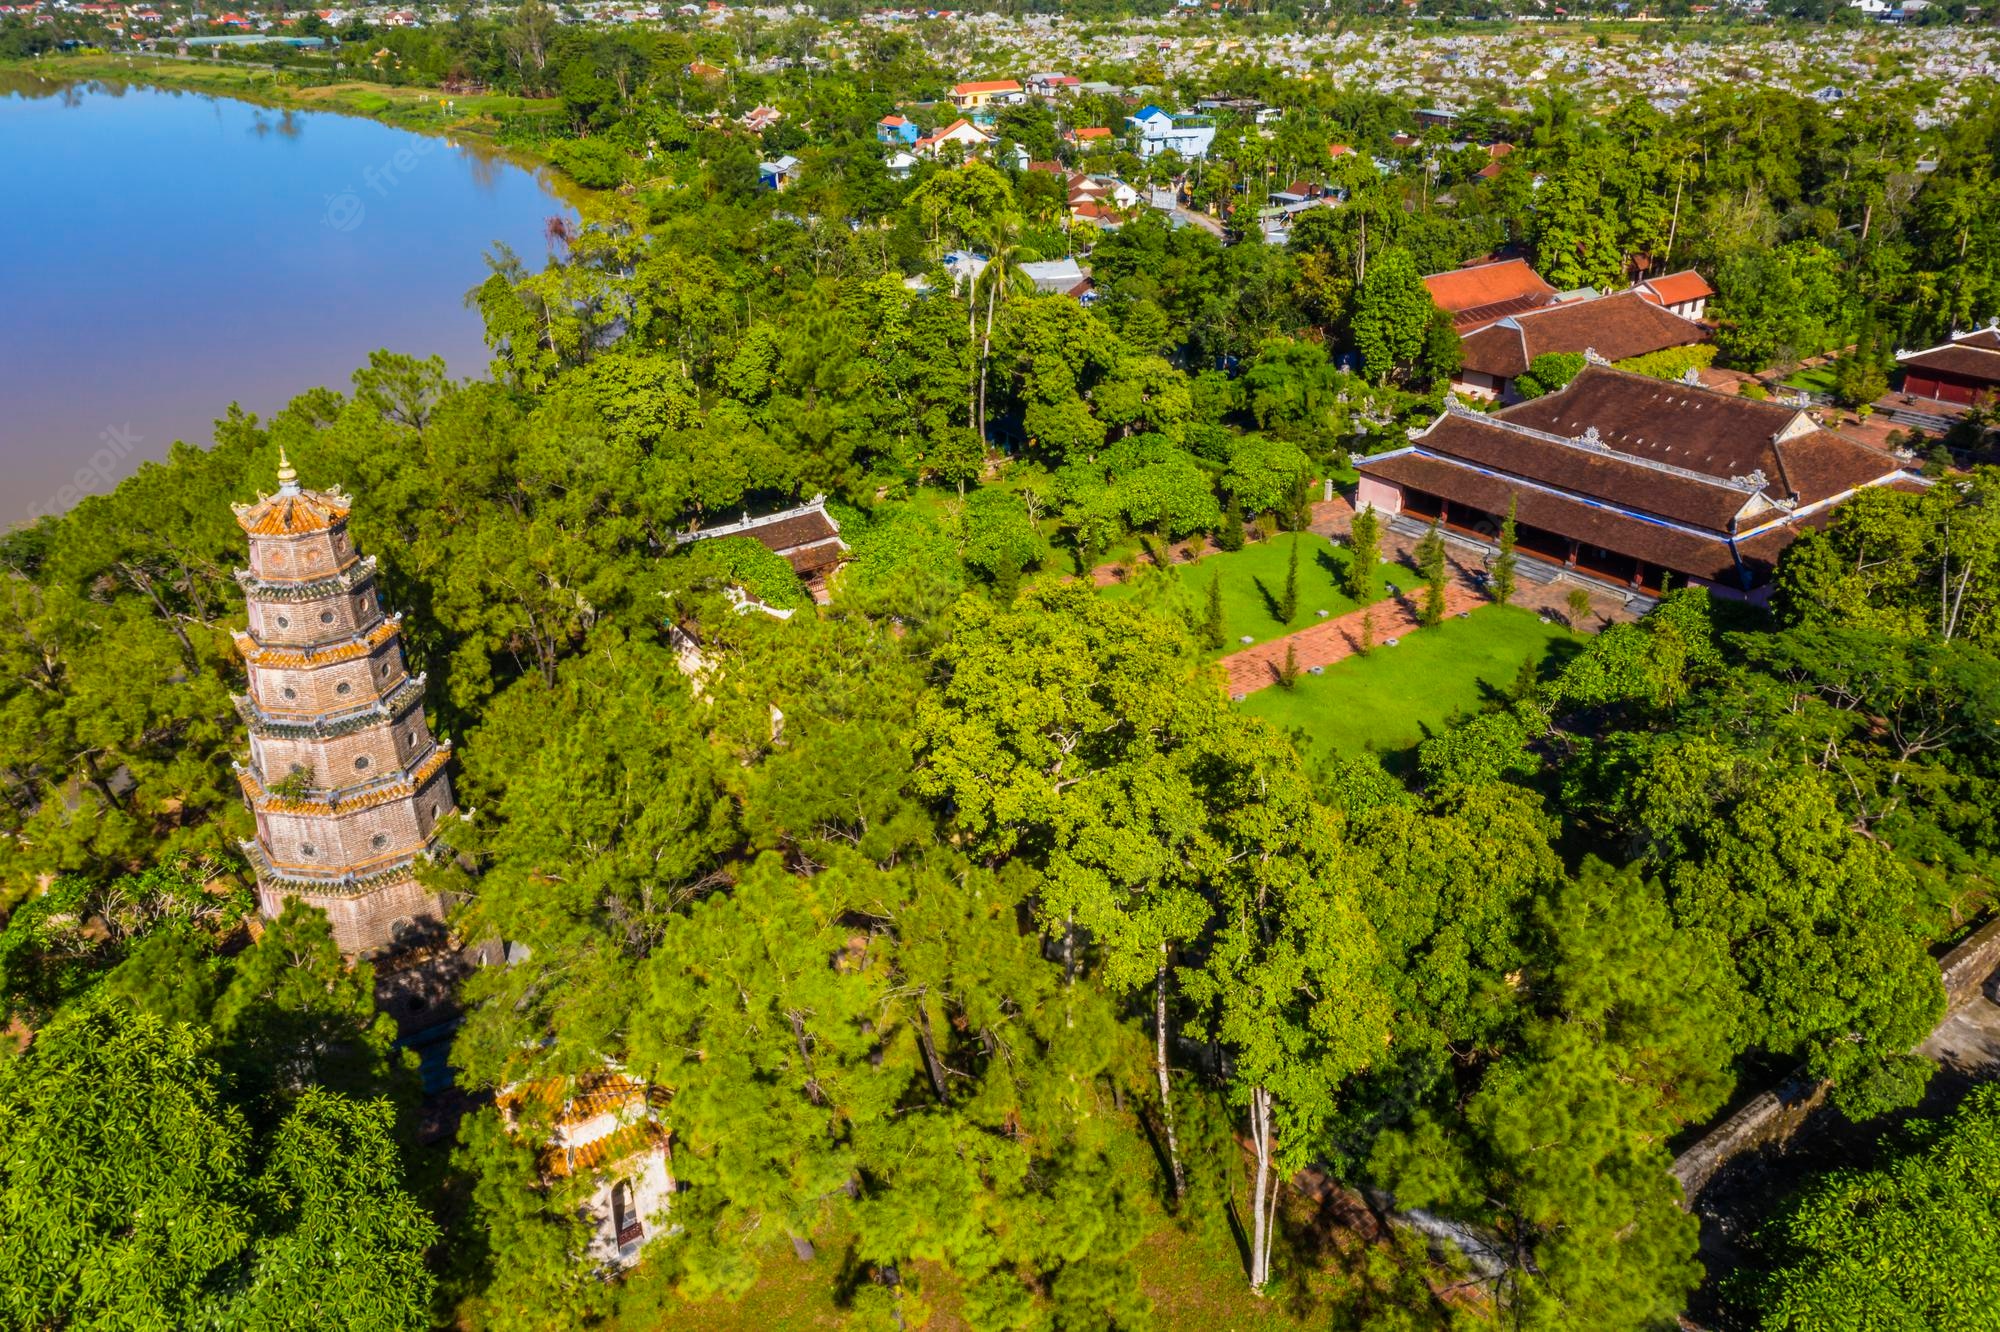 Premium Photo | Aerial view of the thien mu pagoda. it is one of the ancient pagoda in hue city. it is located on the banks of the perfume river in vietnam's